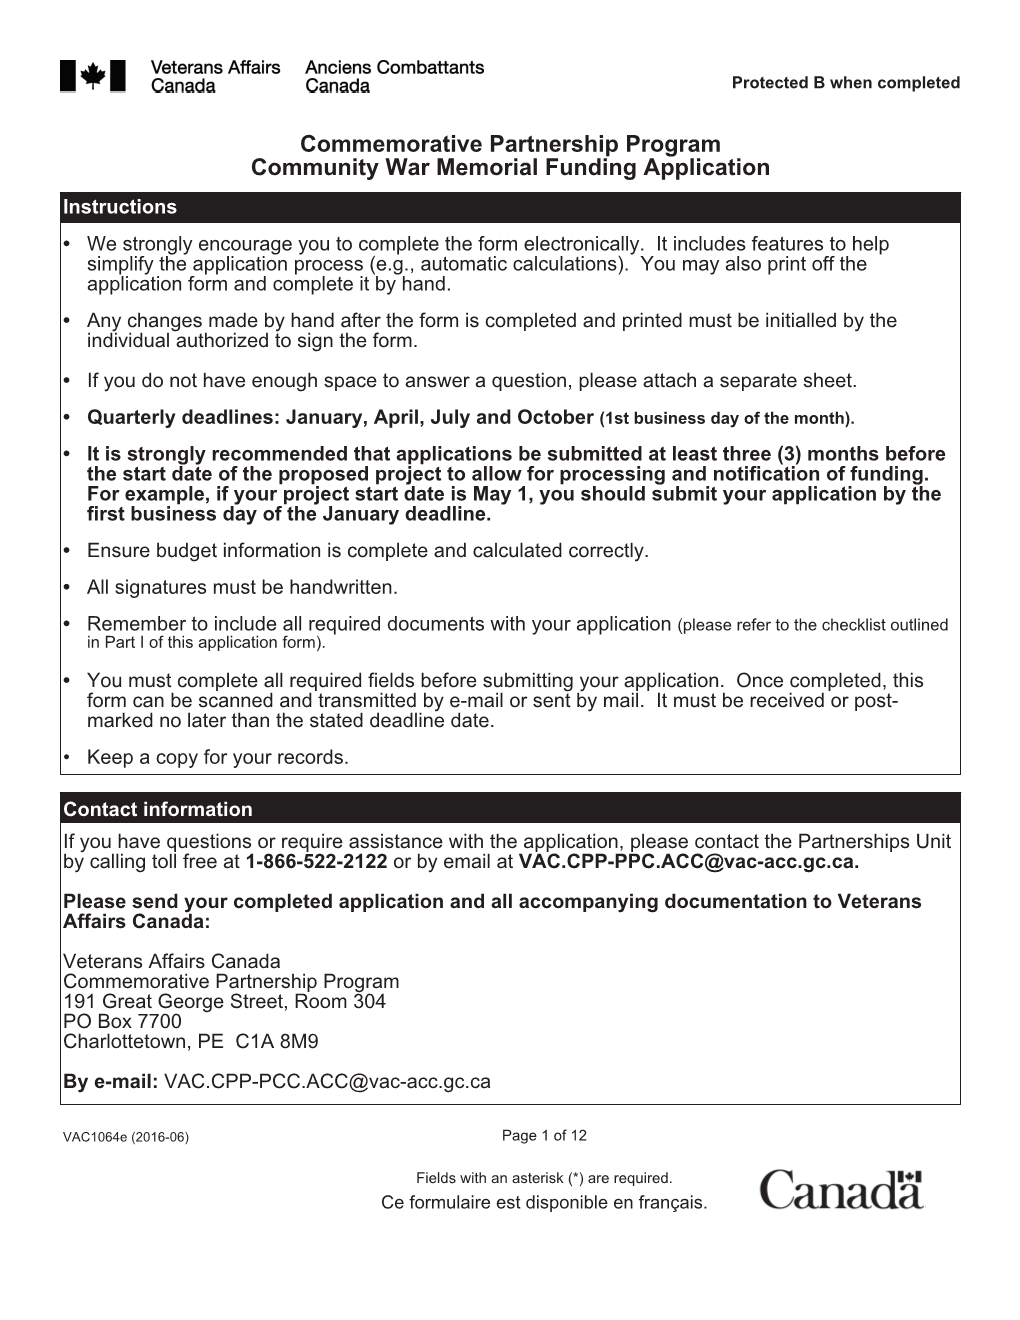 Commemorative Partnership Program Community War Memorial Funding Application Instructions • We Strongly Encourage You to Complete the Form Electronically